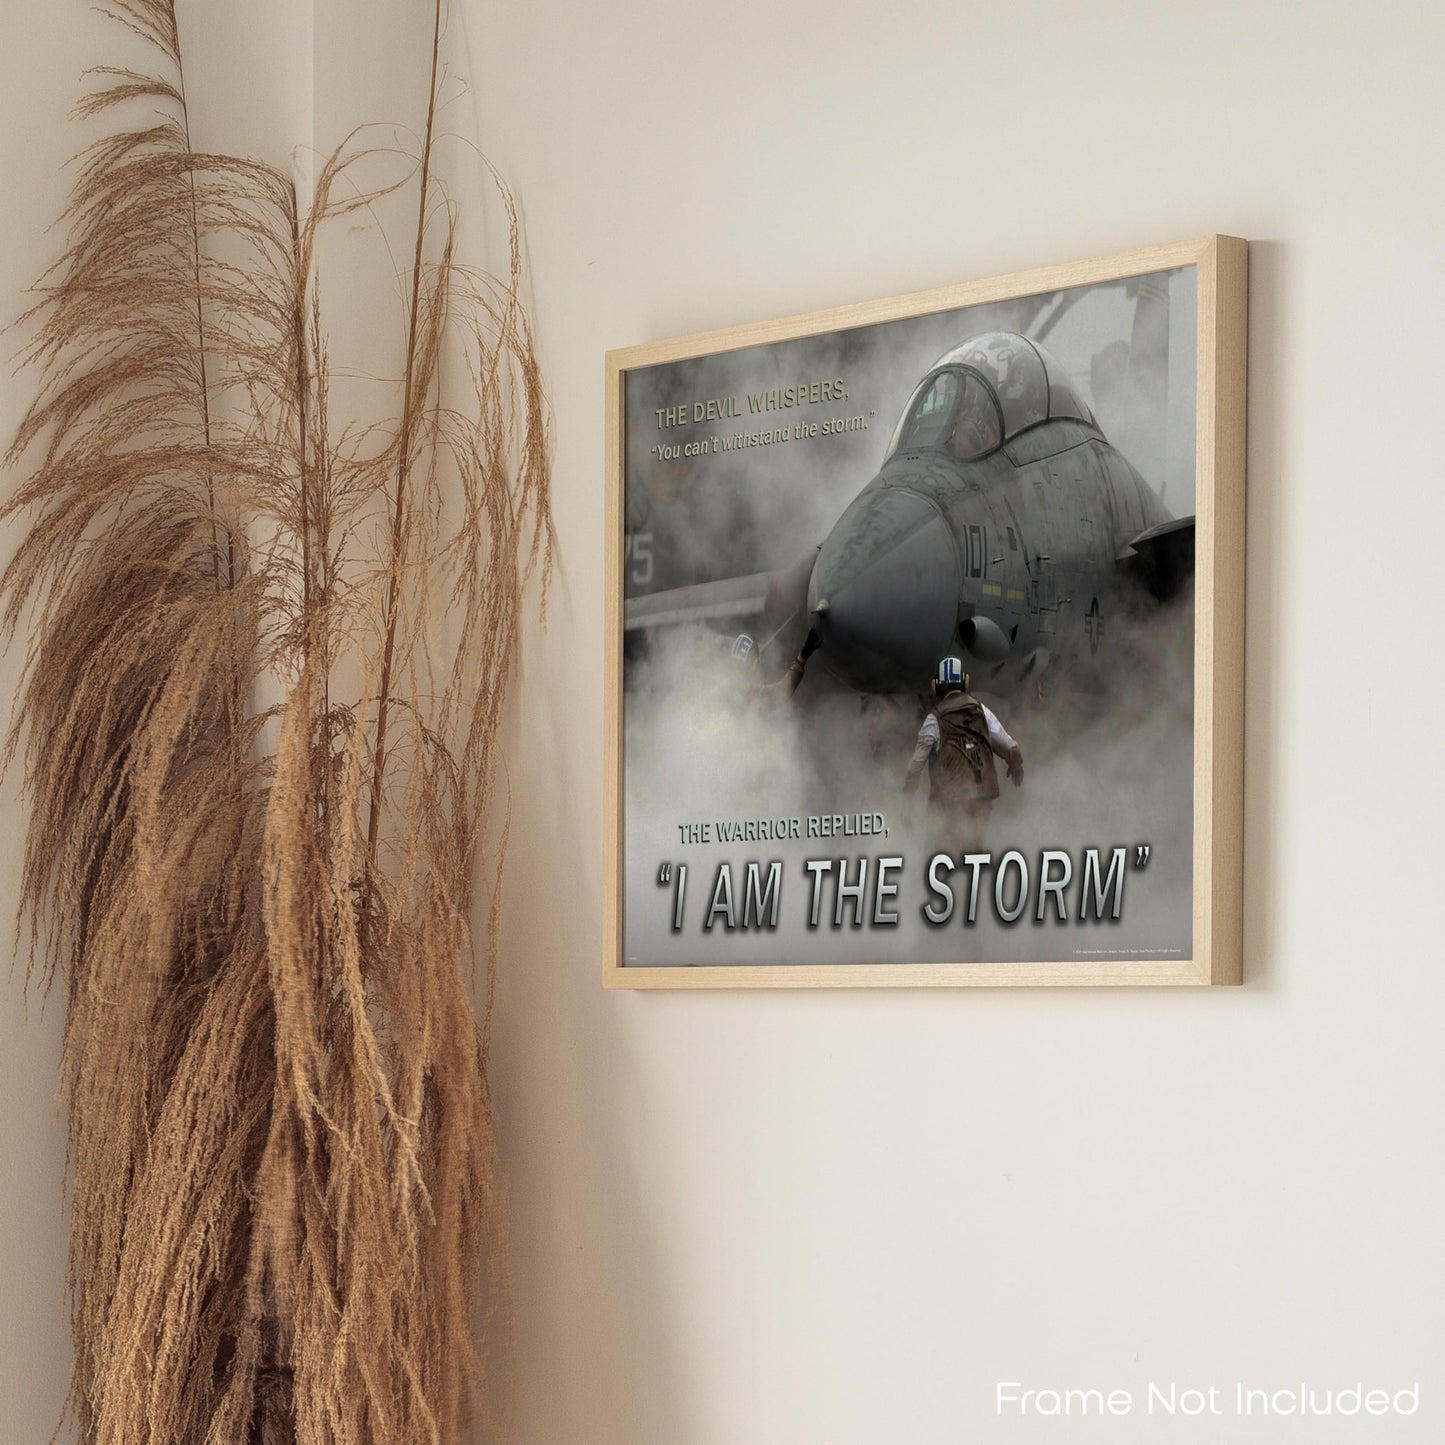 Inspirational Wall Art Co. - I Am The Storm - Air Force Jet Aircraft Branch Veteran Sunset Sky Infantry Motivational Players Quotes Posters - Print Home Gift Bedroom Decor - 11X14 inches